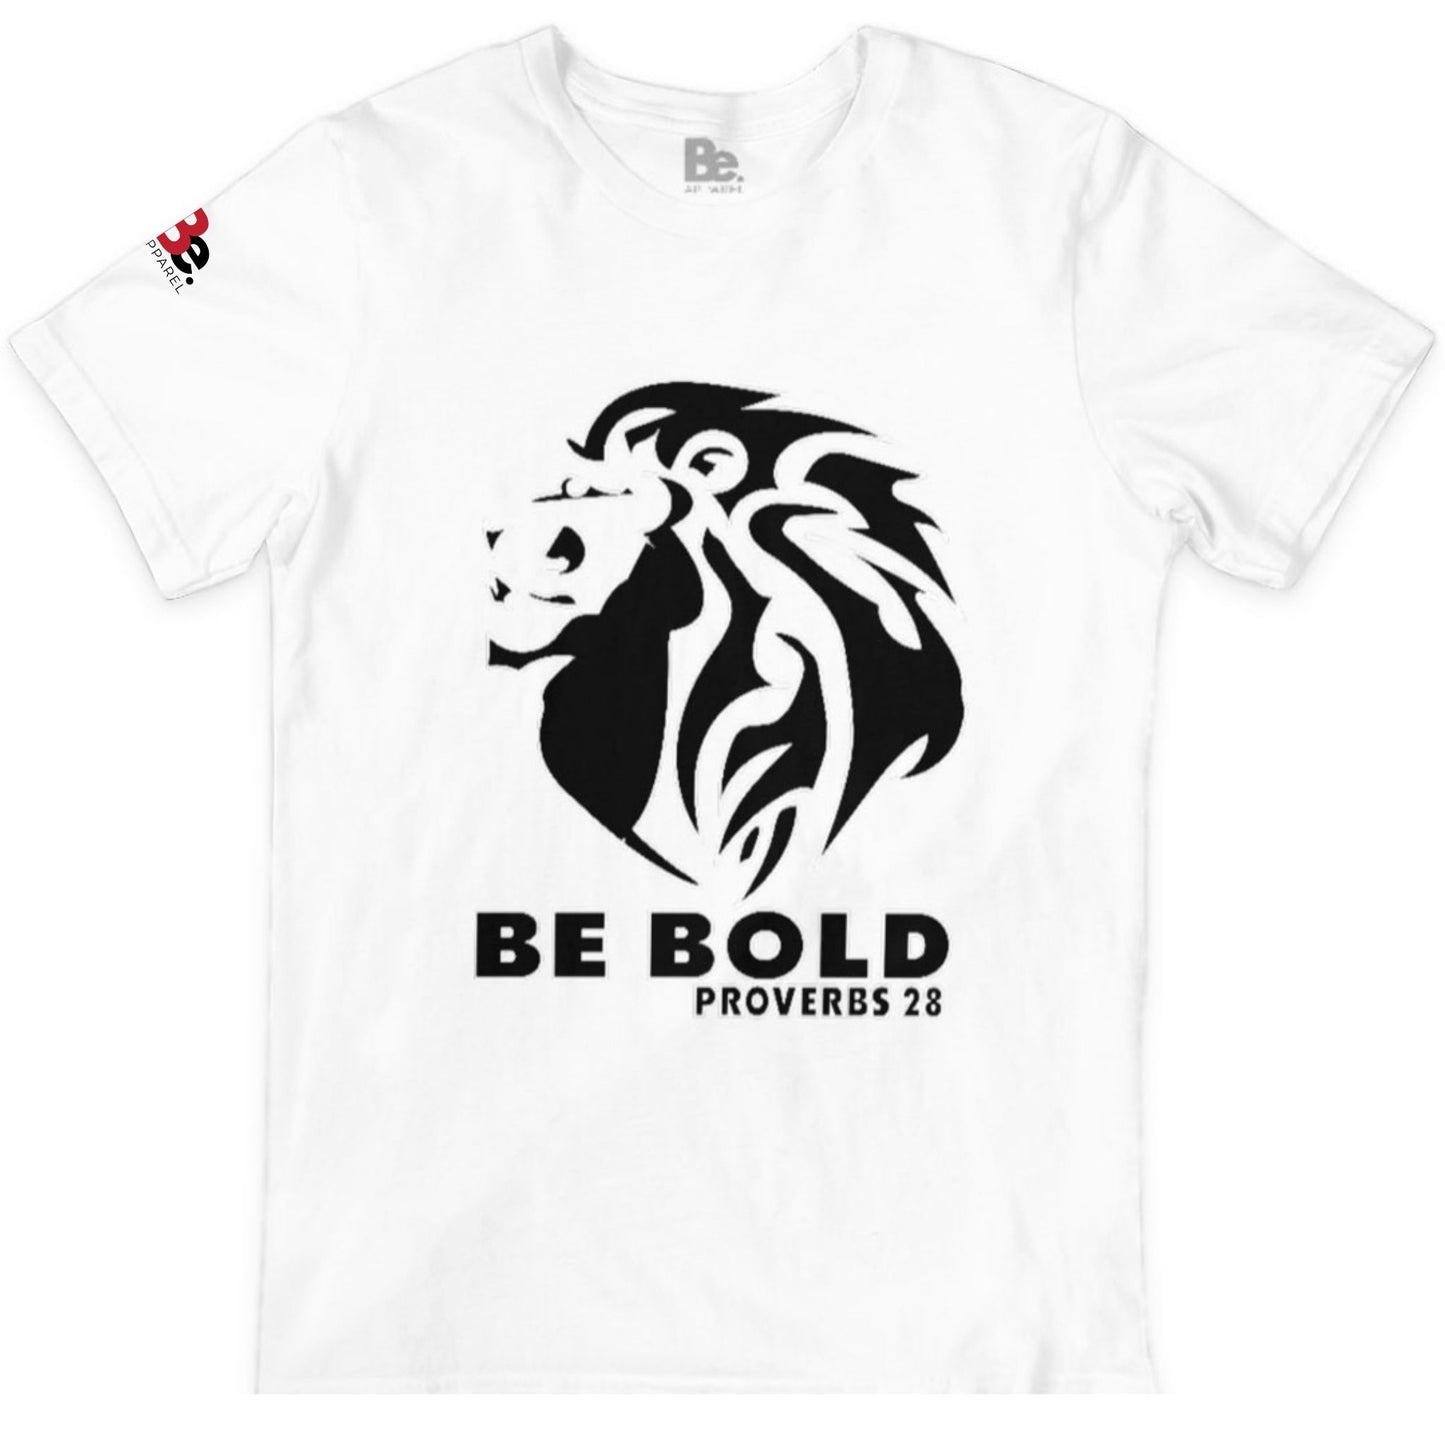 BE BOLD - White Tee (Limited Edition)